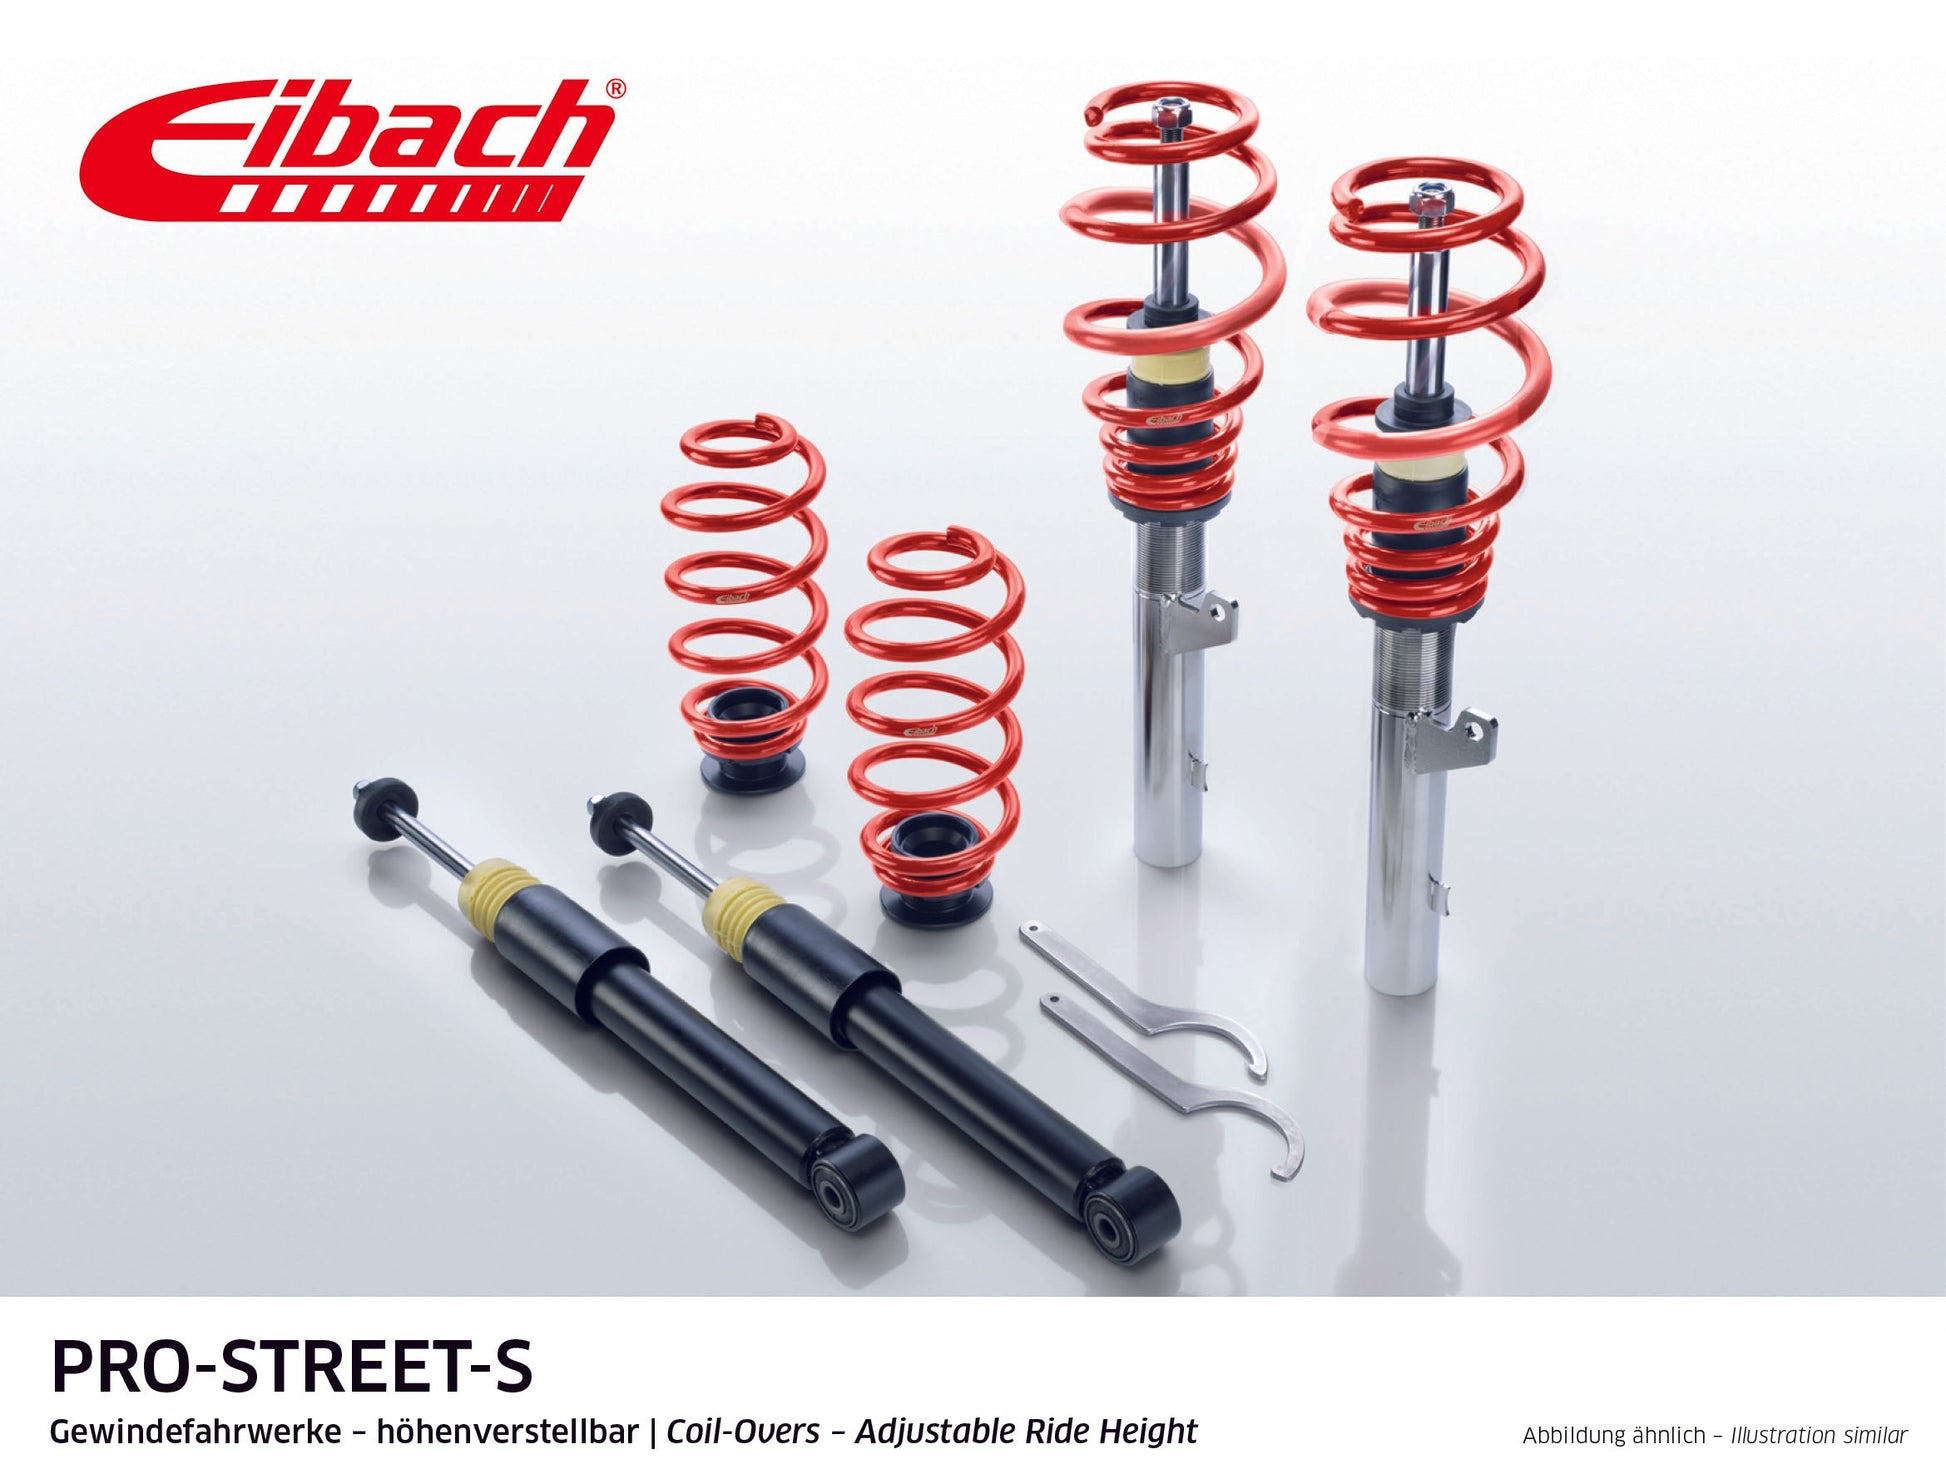 Eibach Pro-Street Coilover (PSS65-15-006-05-22) at £1217.92